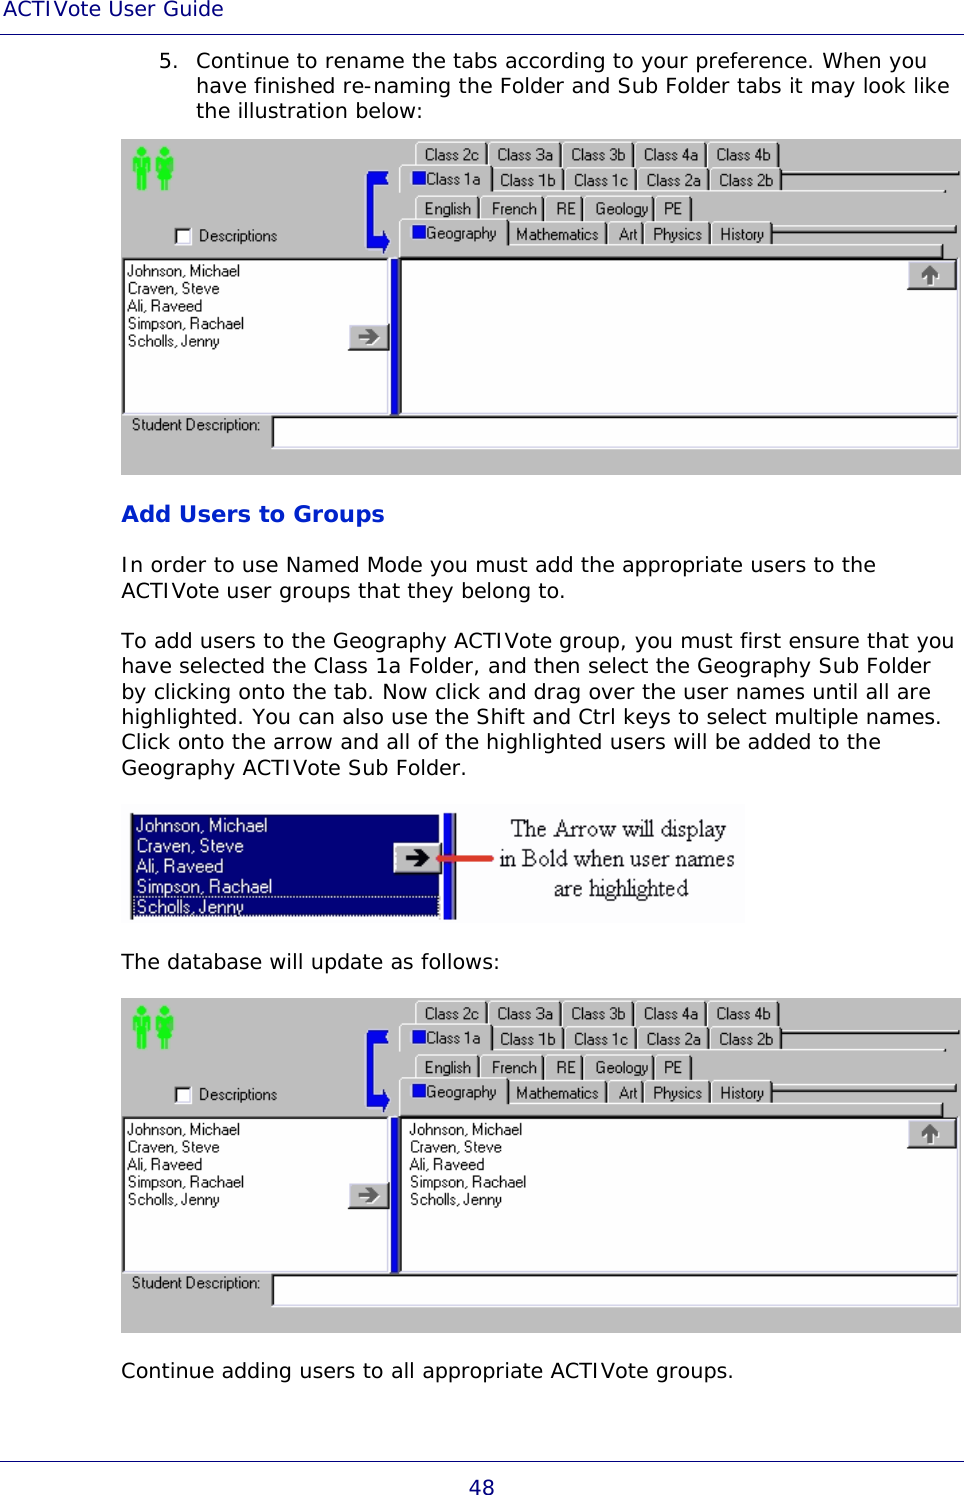 ACTIVote User Guide 48 5. Continue to rename the tabs according to your preference. When you have finished re-naming the Folder and Sub Folder tabs it may look like the illustration below:  Add Users to Groups In order to use Named Mode you must add the appropriate users to the ACTIVote user groups that they belong to. To add users to the Geography ACTIVote group, you must first ensure that you have selected the Class 1a Folder, and then select the Geography Sub Folder by clicking onto the tab. Now click and drag over the user names until all are highlighted. You can also use the Shift and Ctrl keys to select multiple names. Click onto the arrow and all of the highlighted users will be added to the Geography ACTIVote Sub Folder.  The database will update as follows:  Continue adding users to all appropriate ACTIVote groups. 